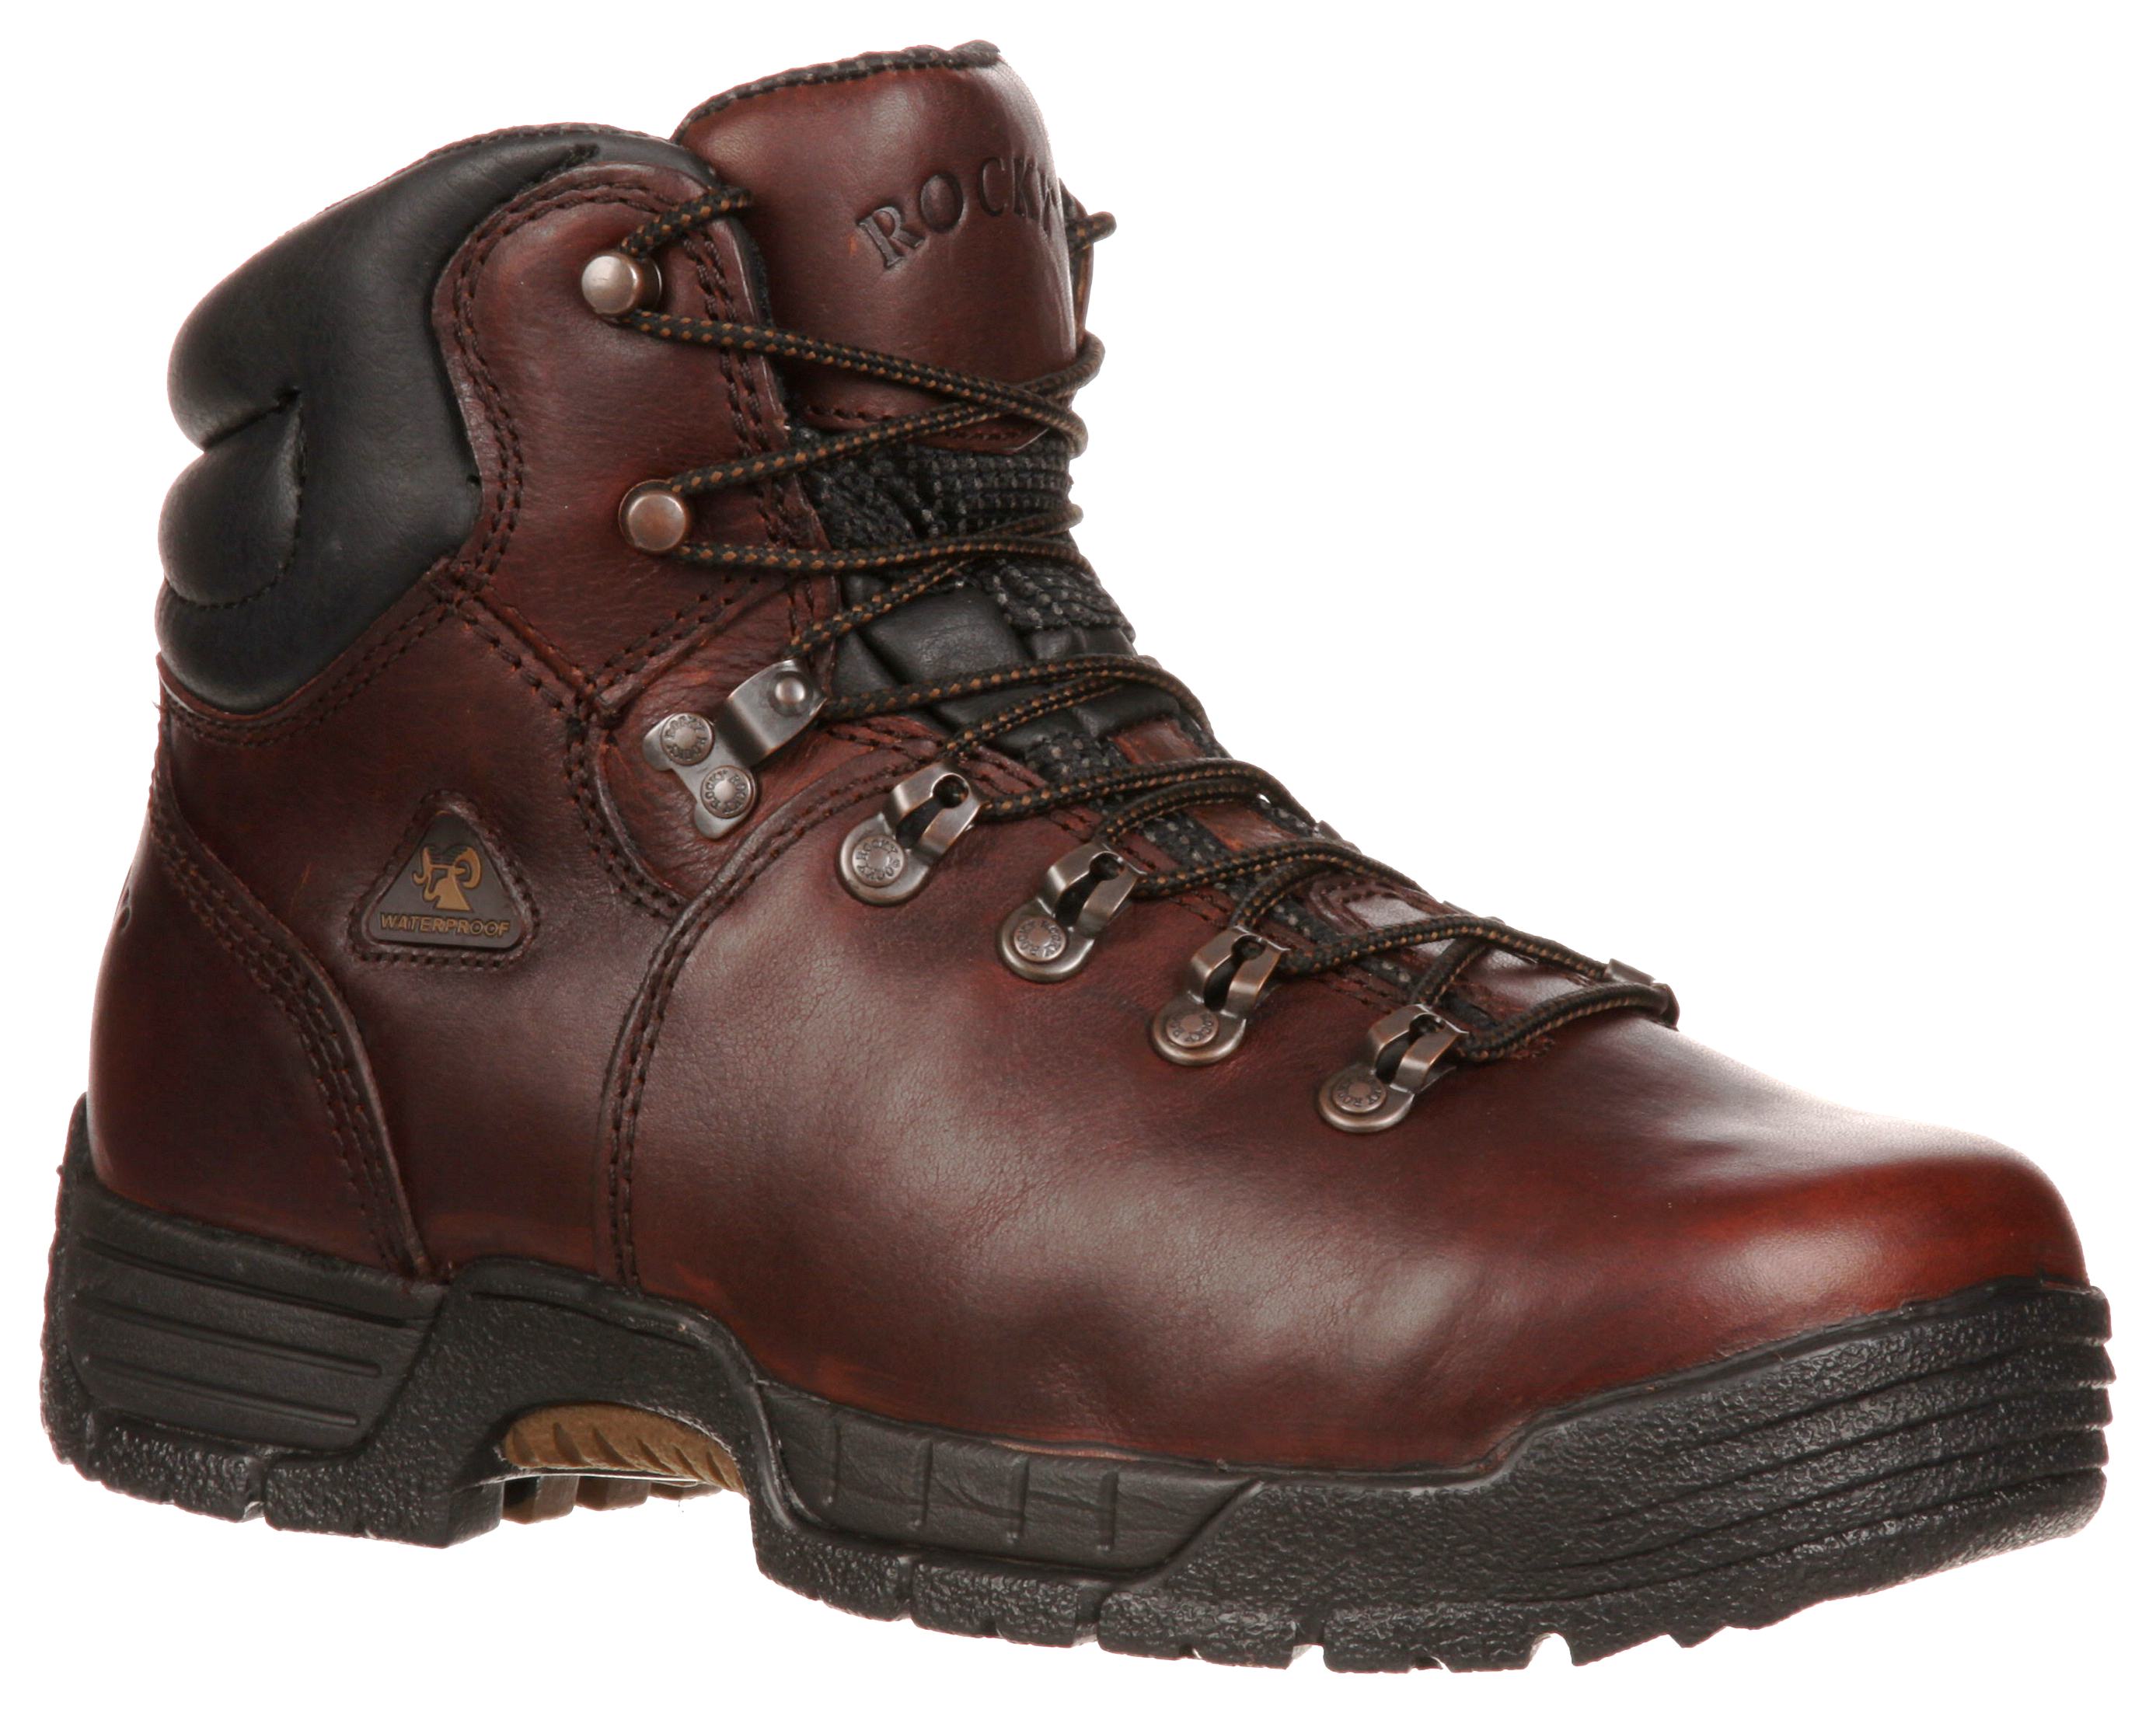 ROCKY MobiLite Waterproof Work Boots for Men - Brown - 13 W